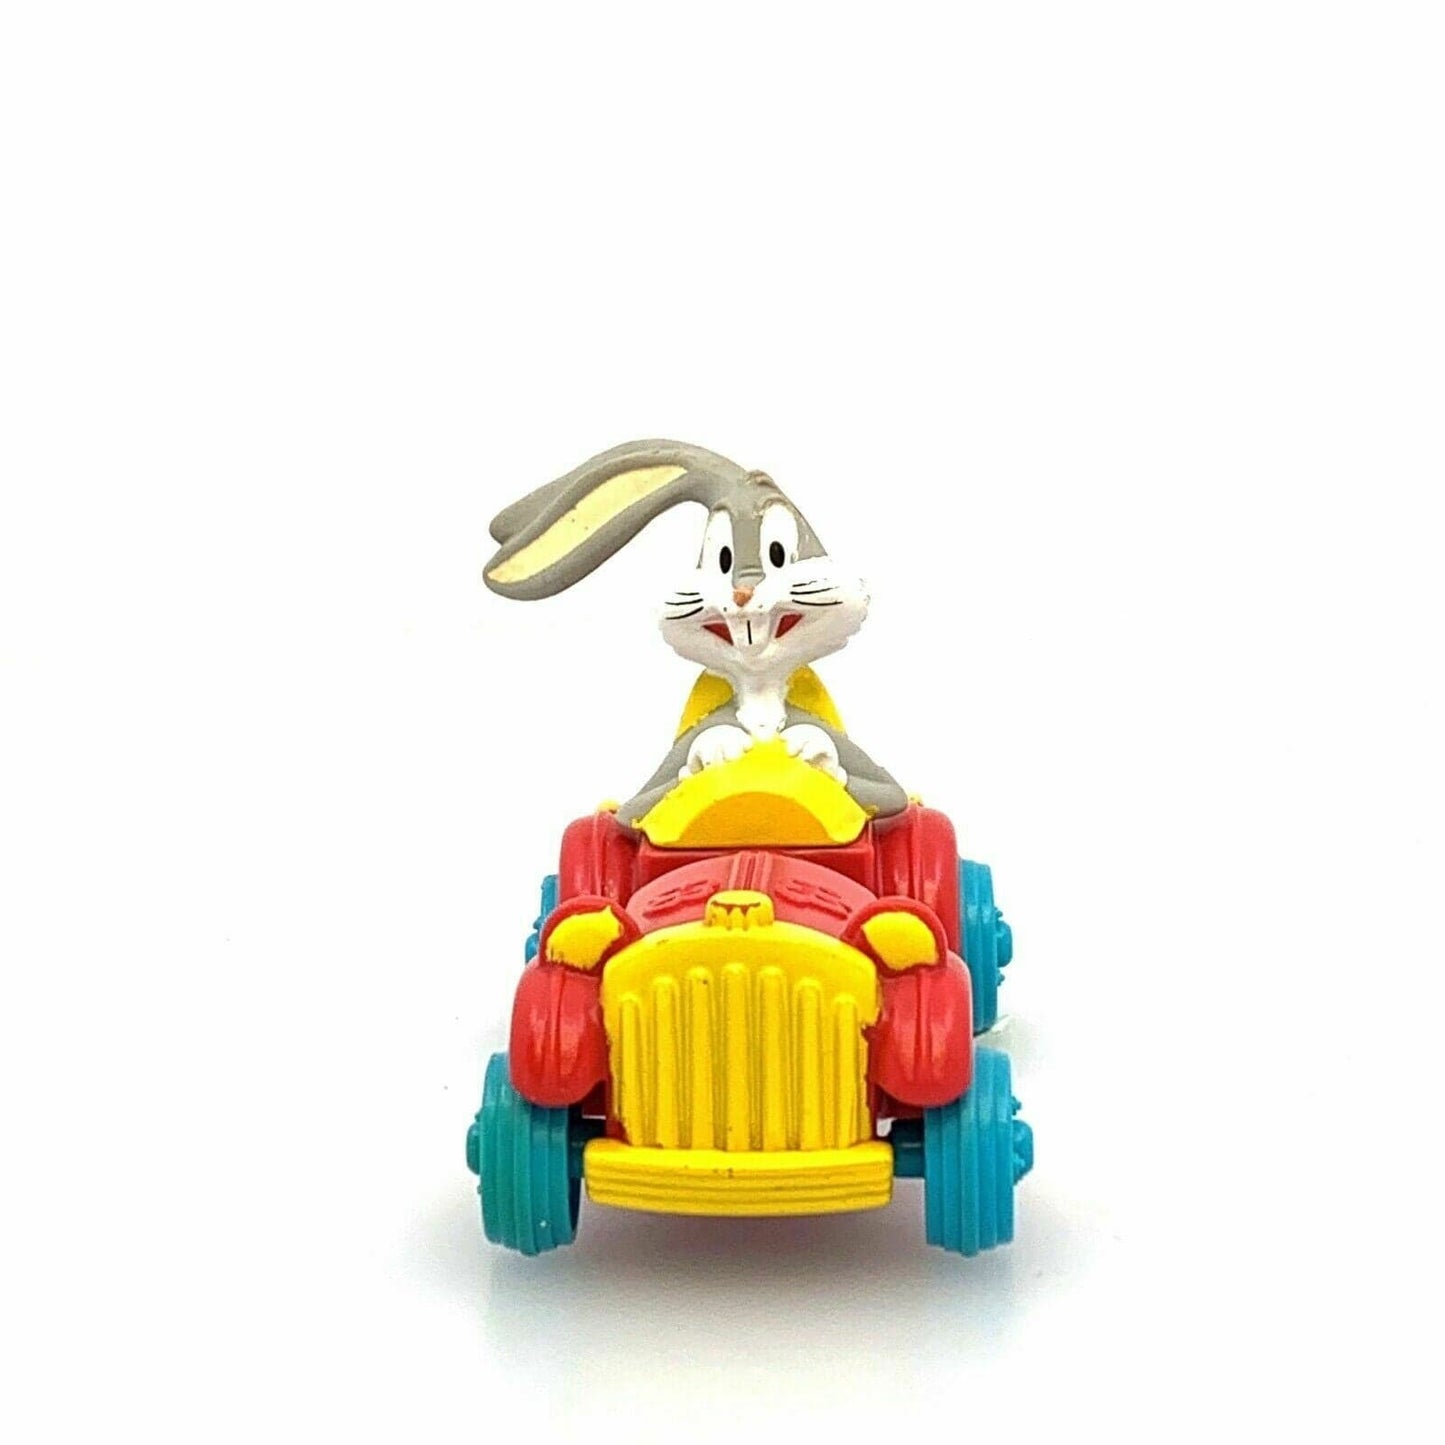 Vintage Bugs Bunny Stretching Limo Toy Car Warner Bros) 1992 McDonalds Happy Meal Toy